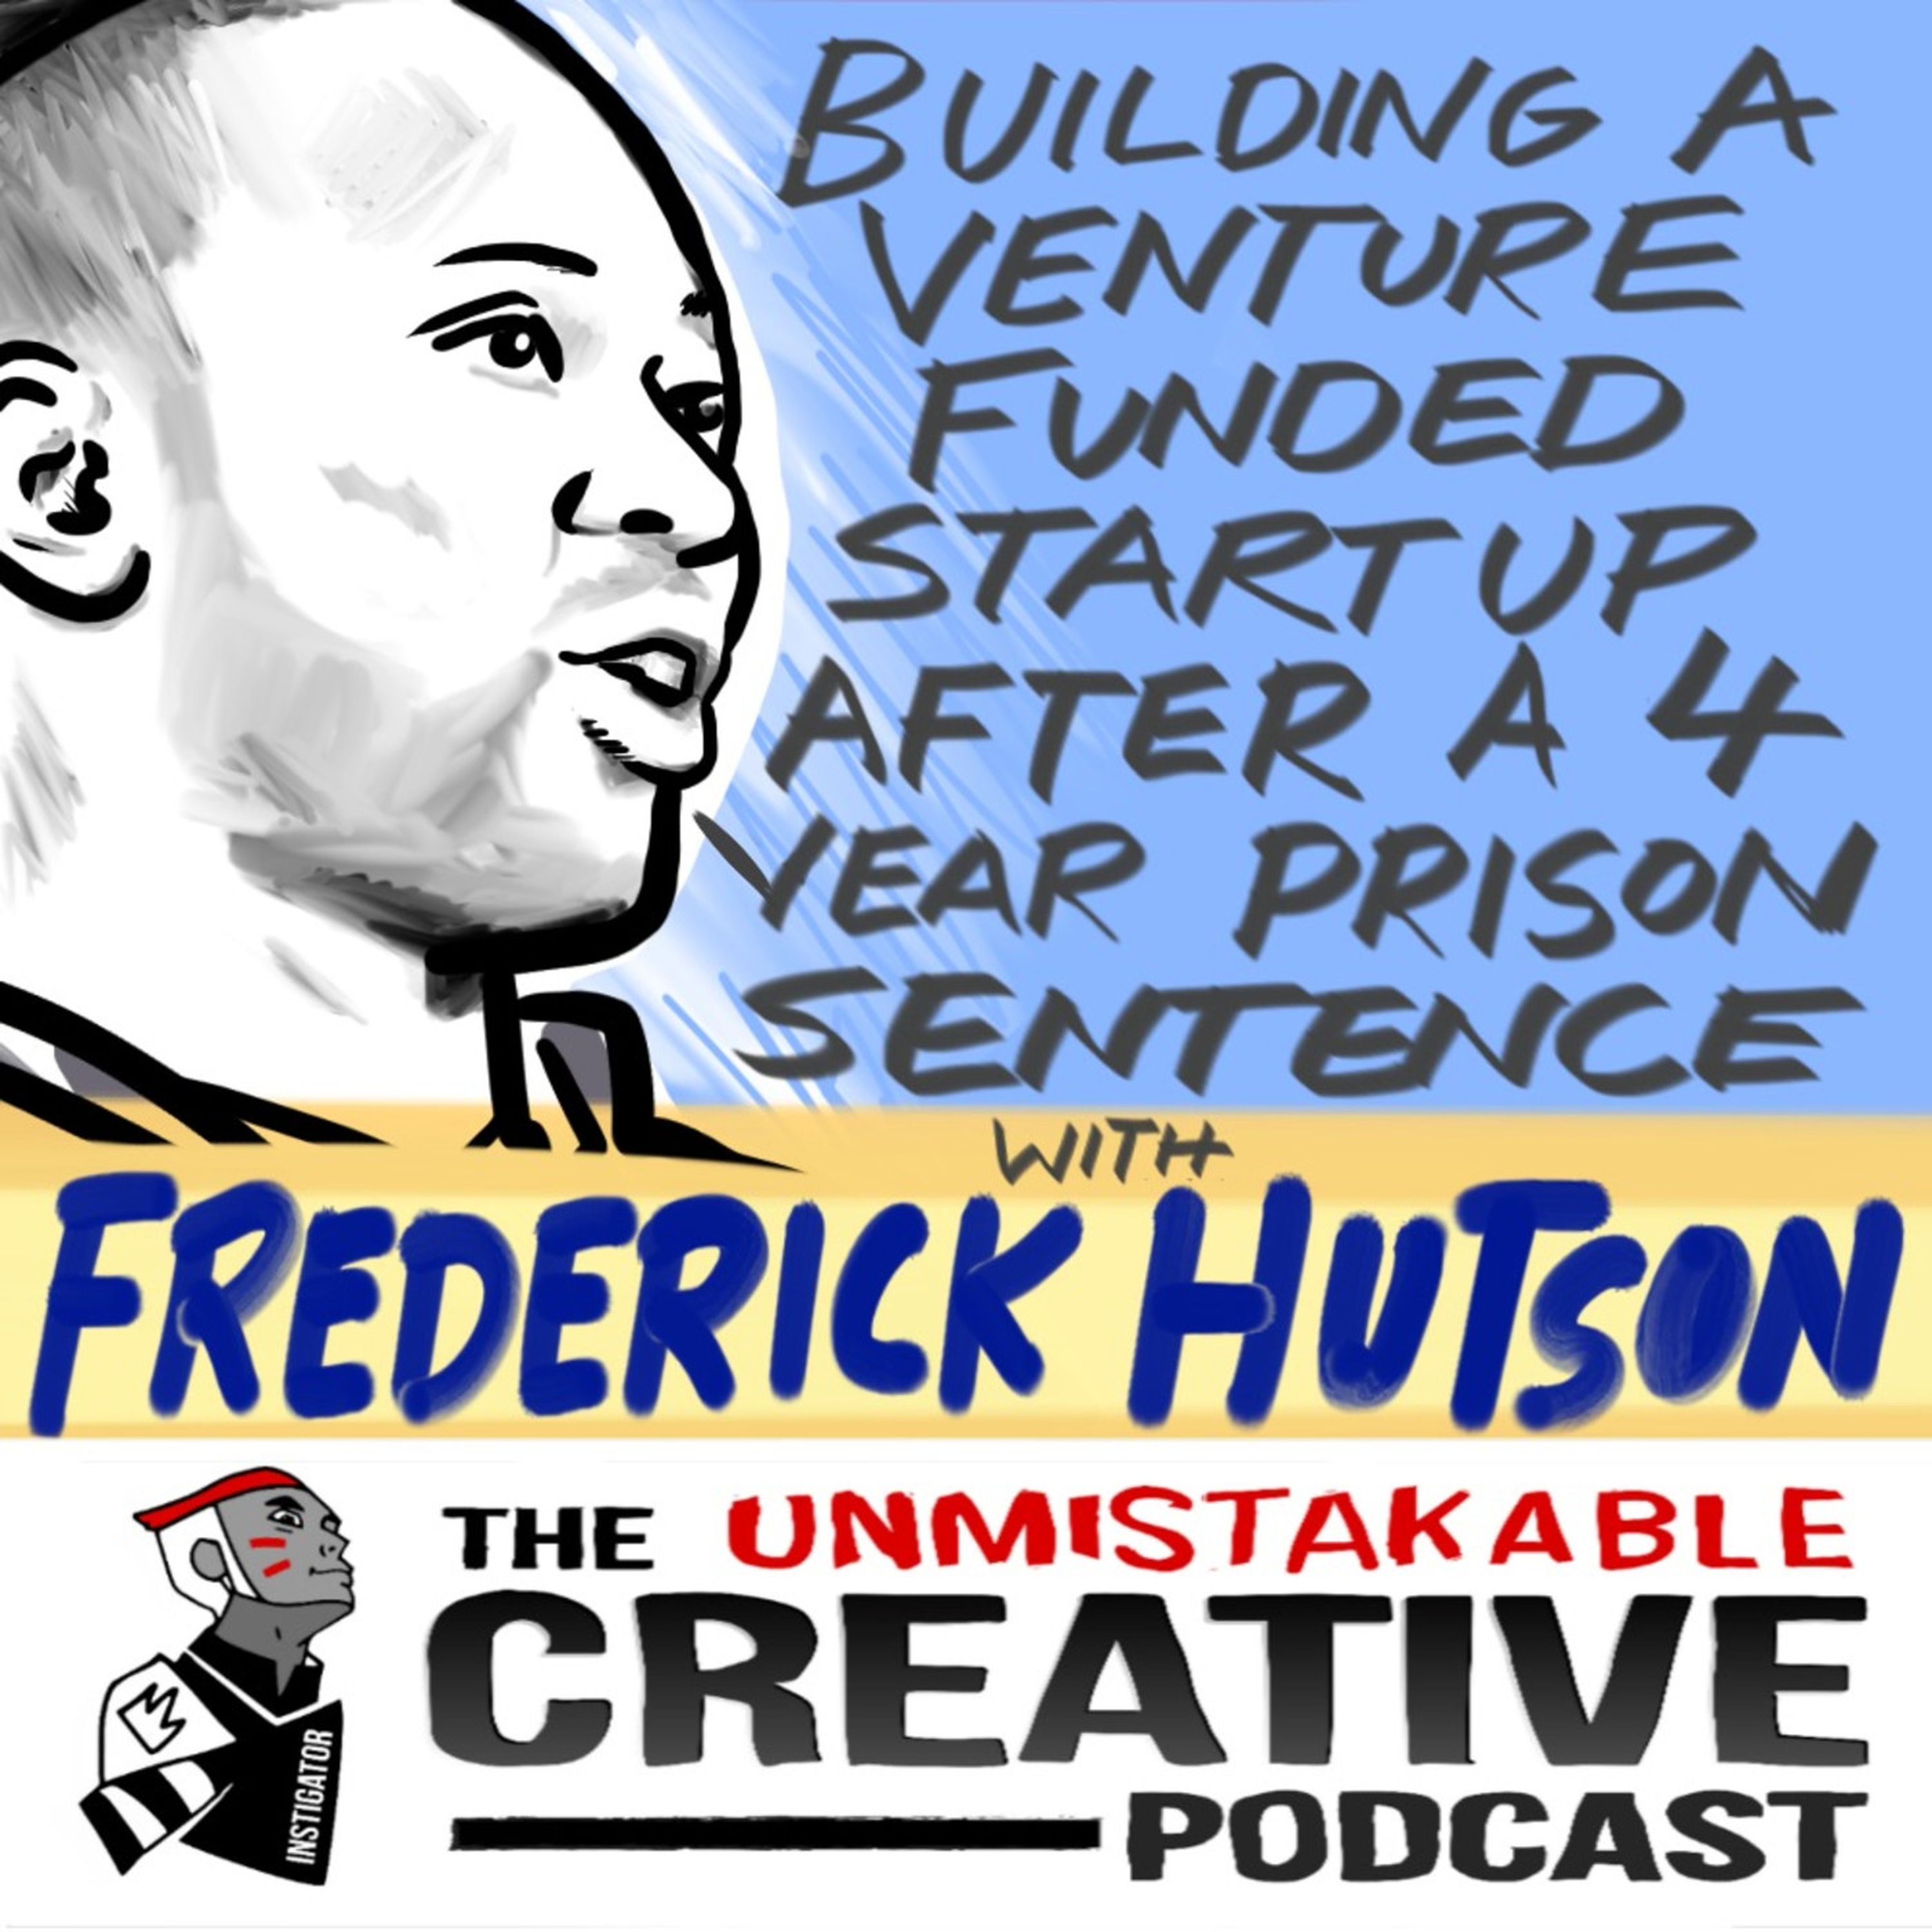 Building a Venture Funded Startup after a Four Year Prison Sentence with Frederick Hutson Image